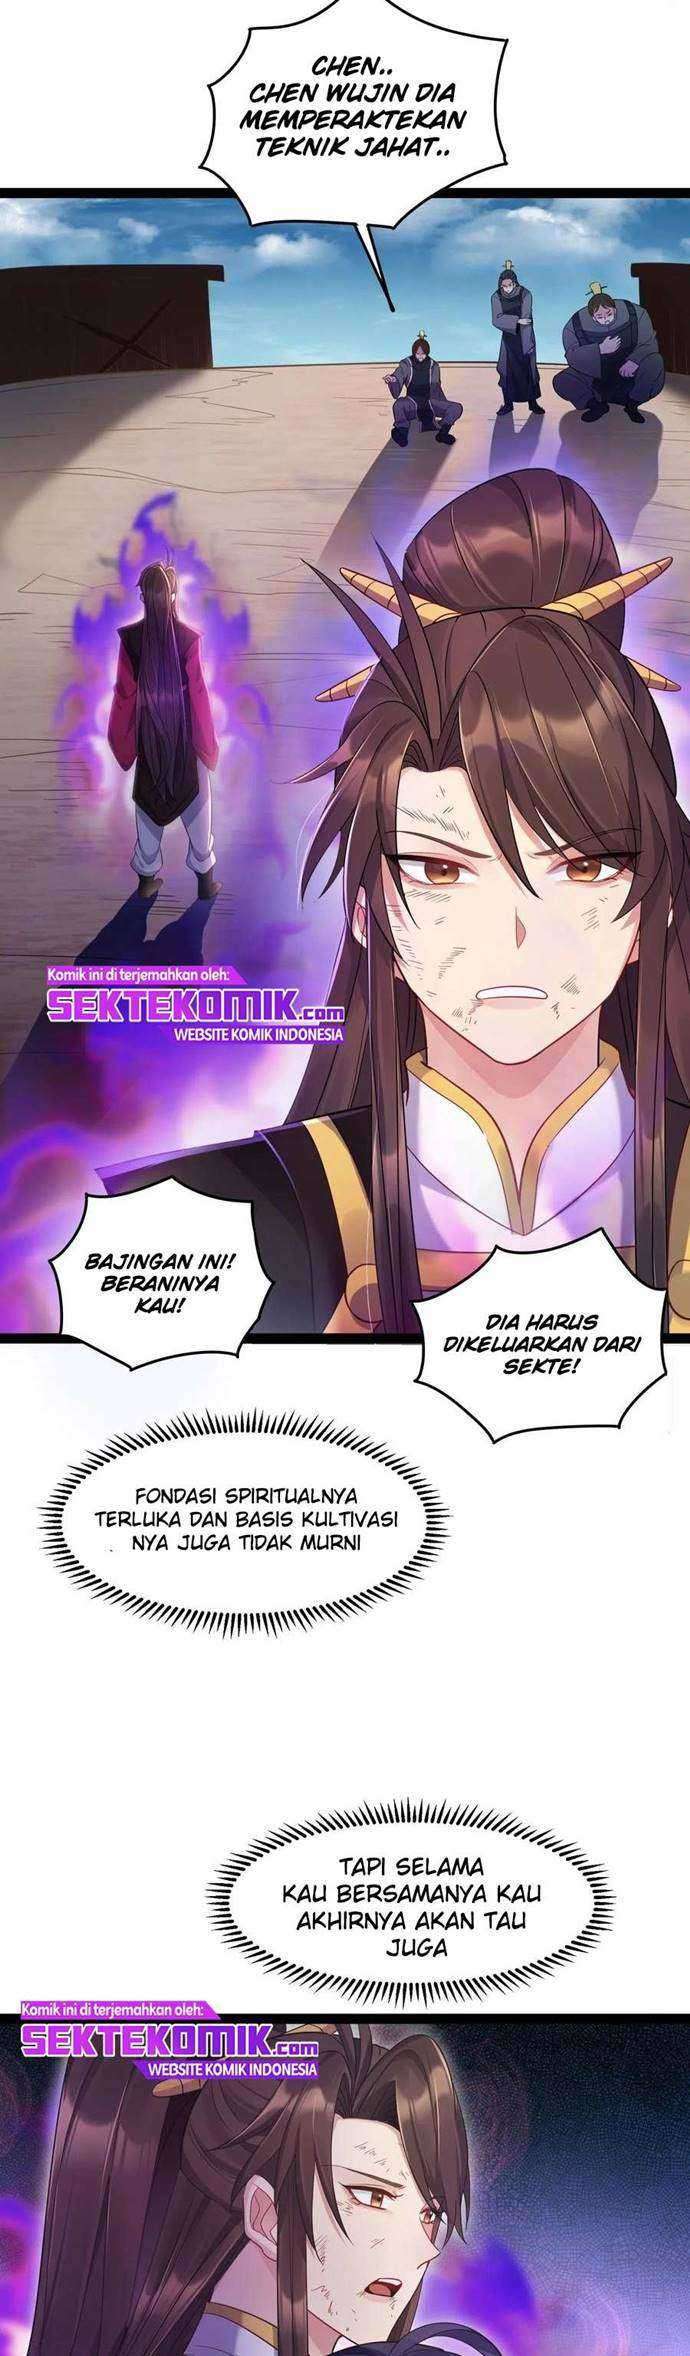 Become A villain In Cultivation World Game Chapter 04